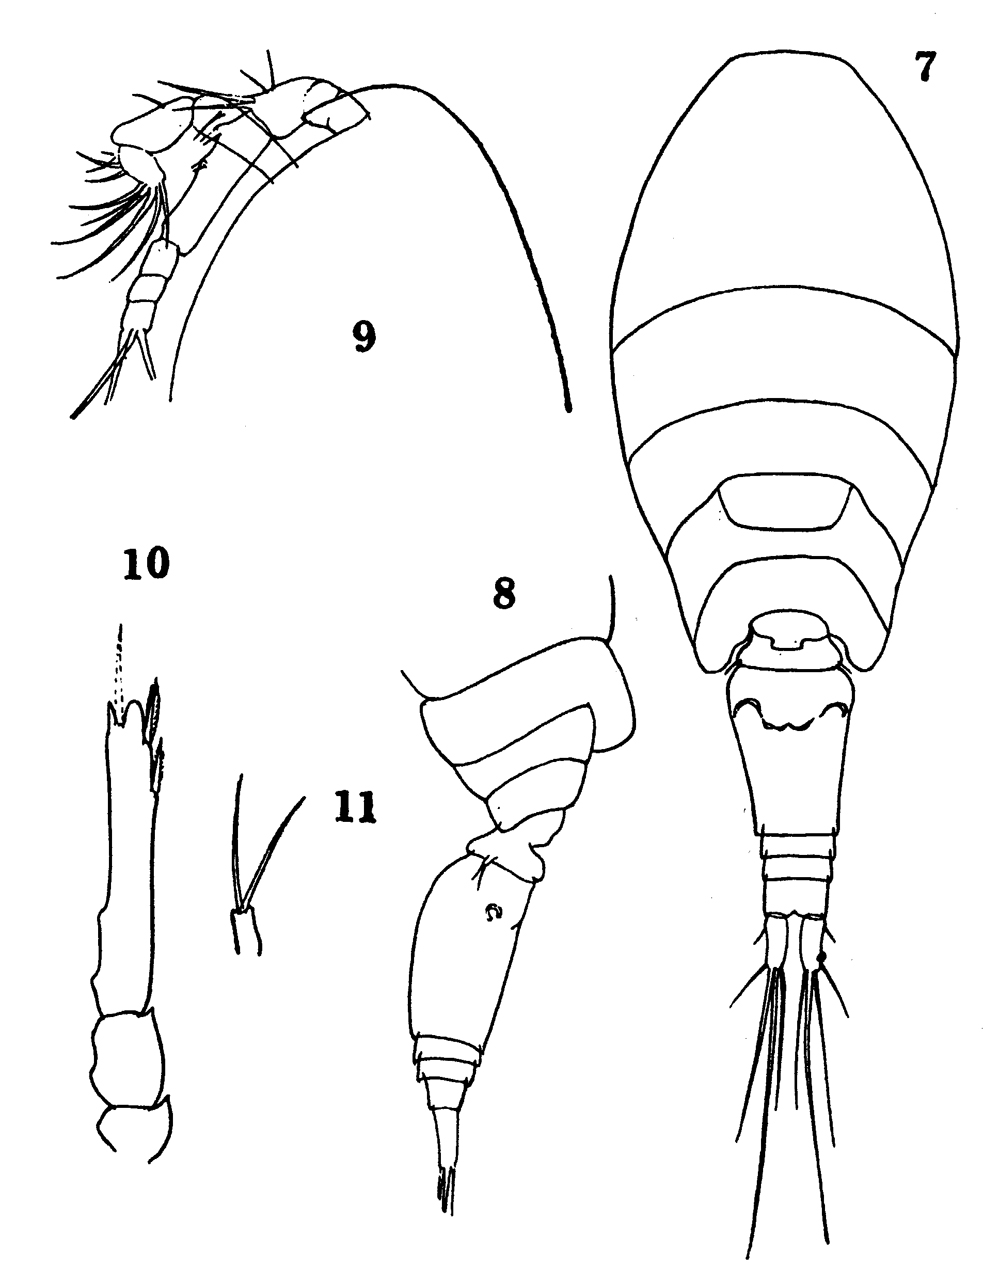 Species Oncaea clevei - Plate 11 of morphological figures